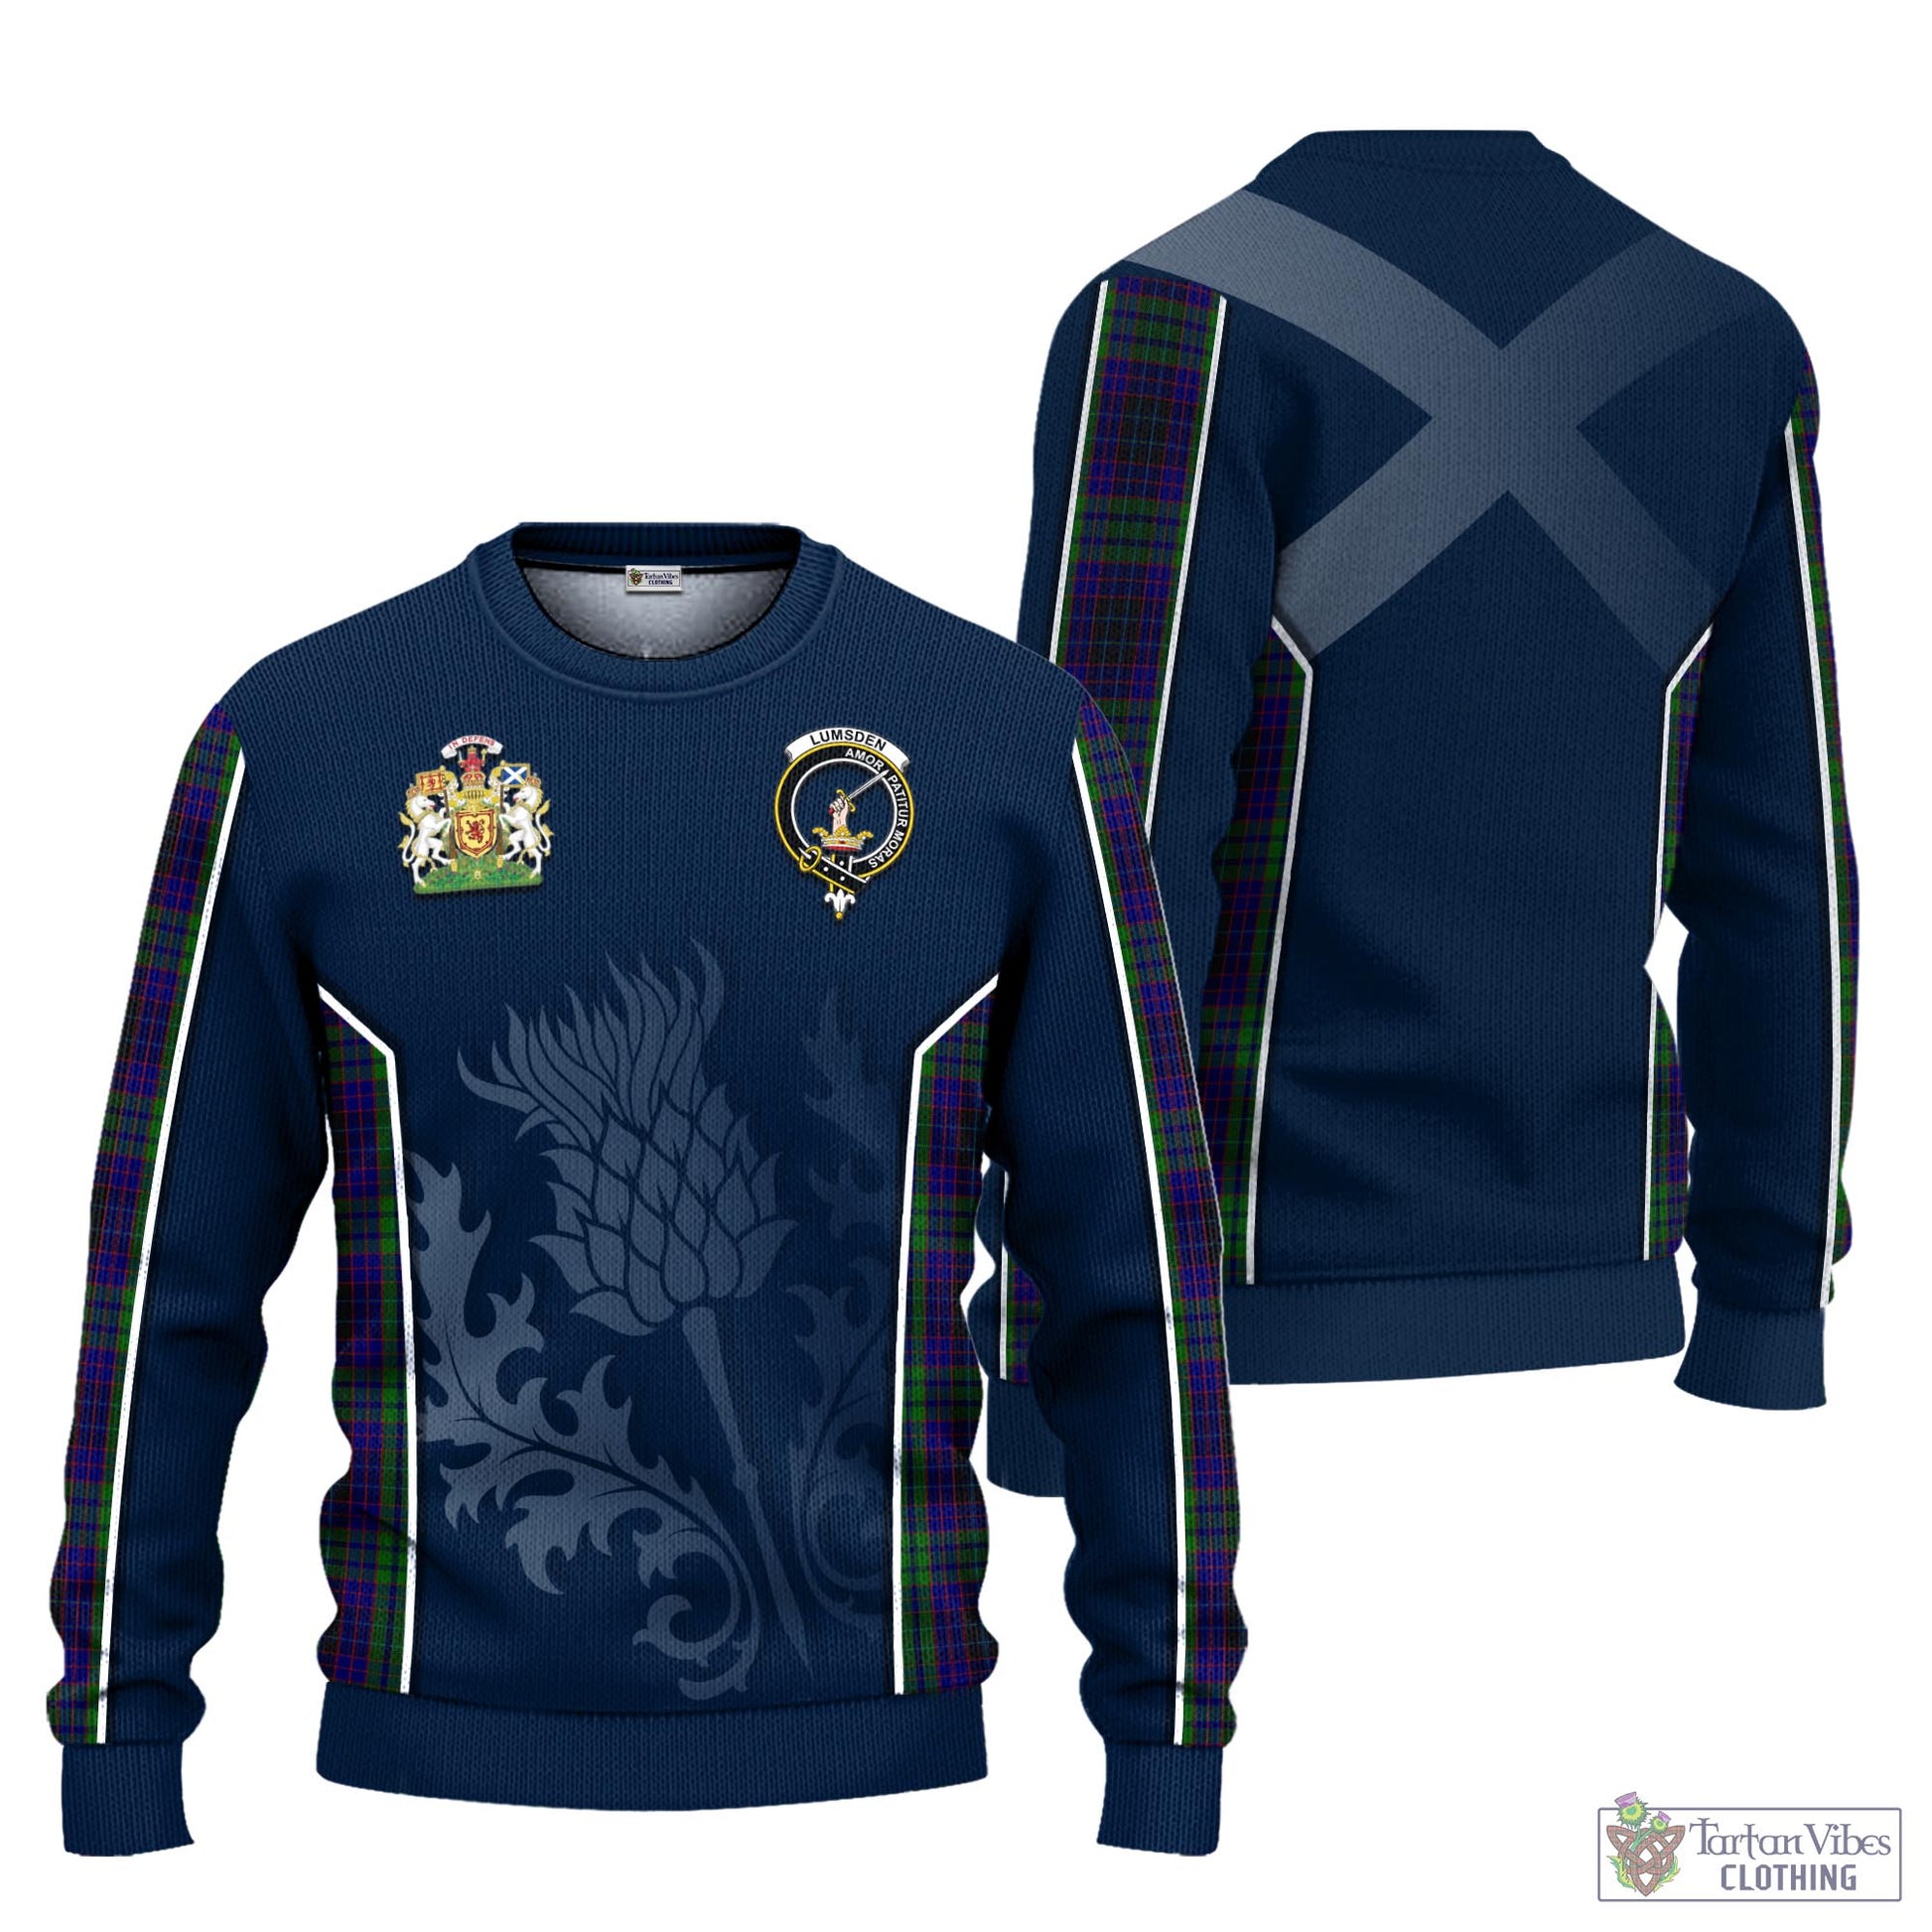 Tartan Vibes Clothing Lumsden Green Tartan Knitted Sweatshirt with Family Crest and Scottish Thistle Vibes Sport Style